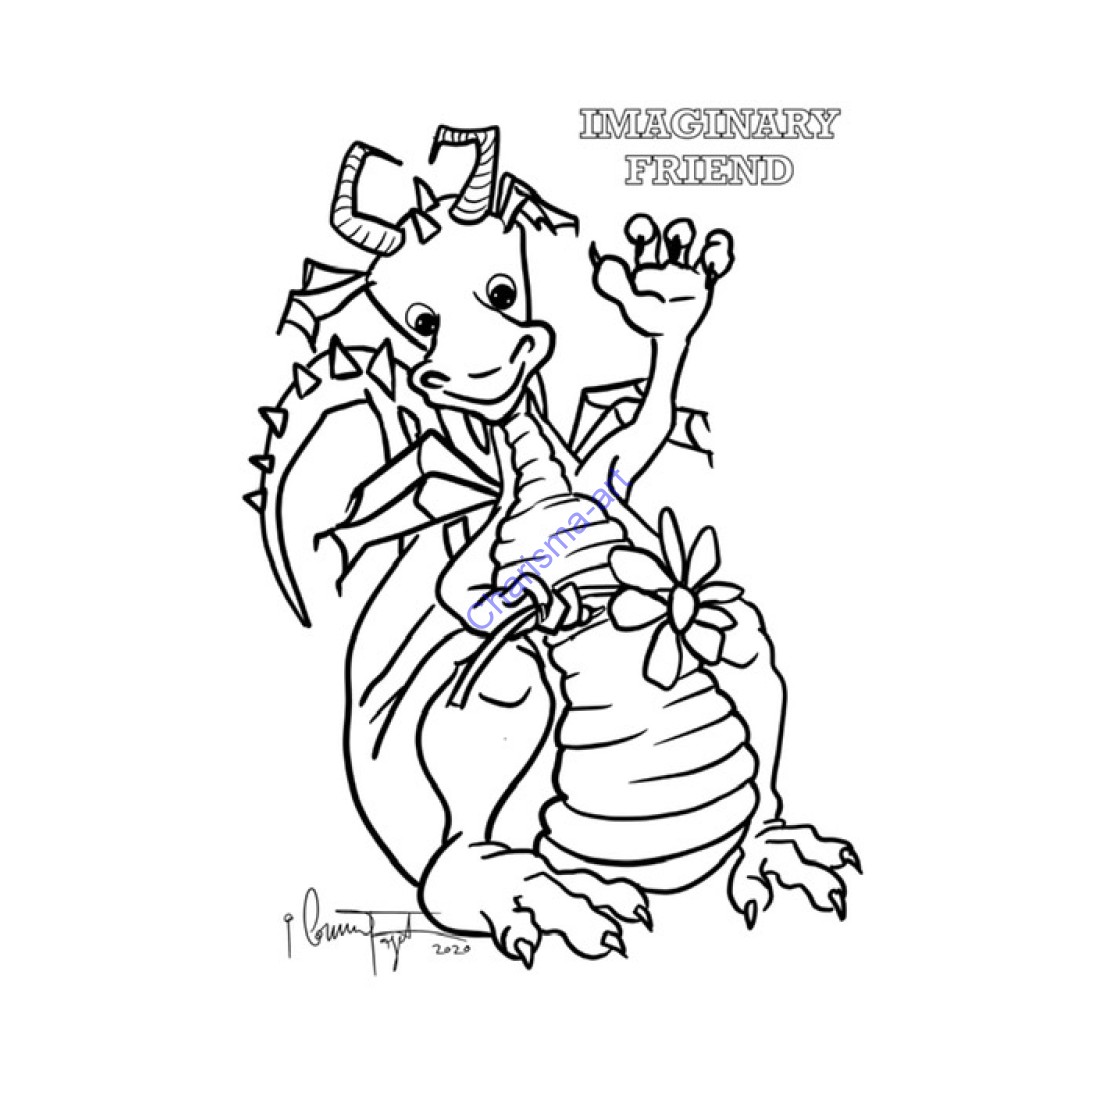 Download Coloring Page Imaginary Friend Kids Version 8.5"x11"Digital Download